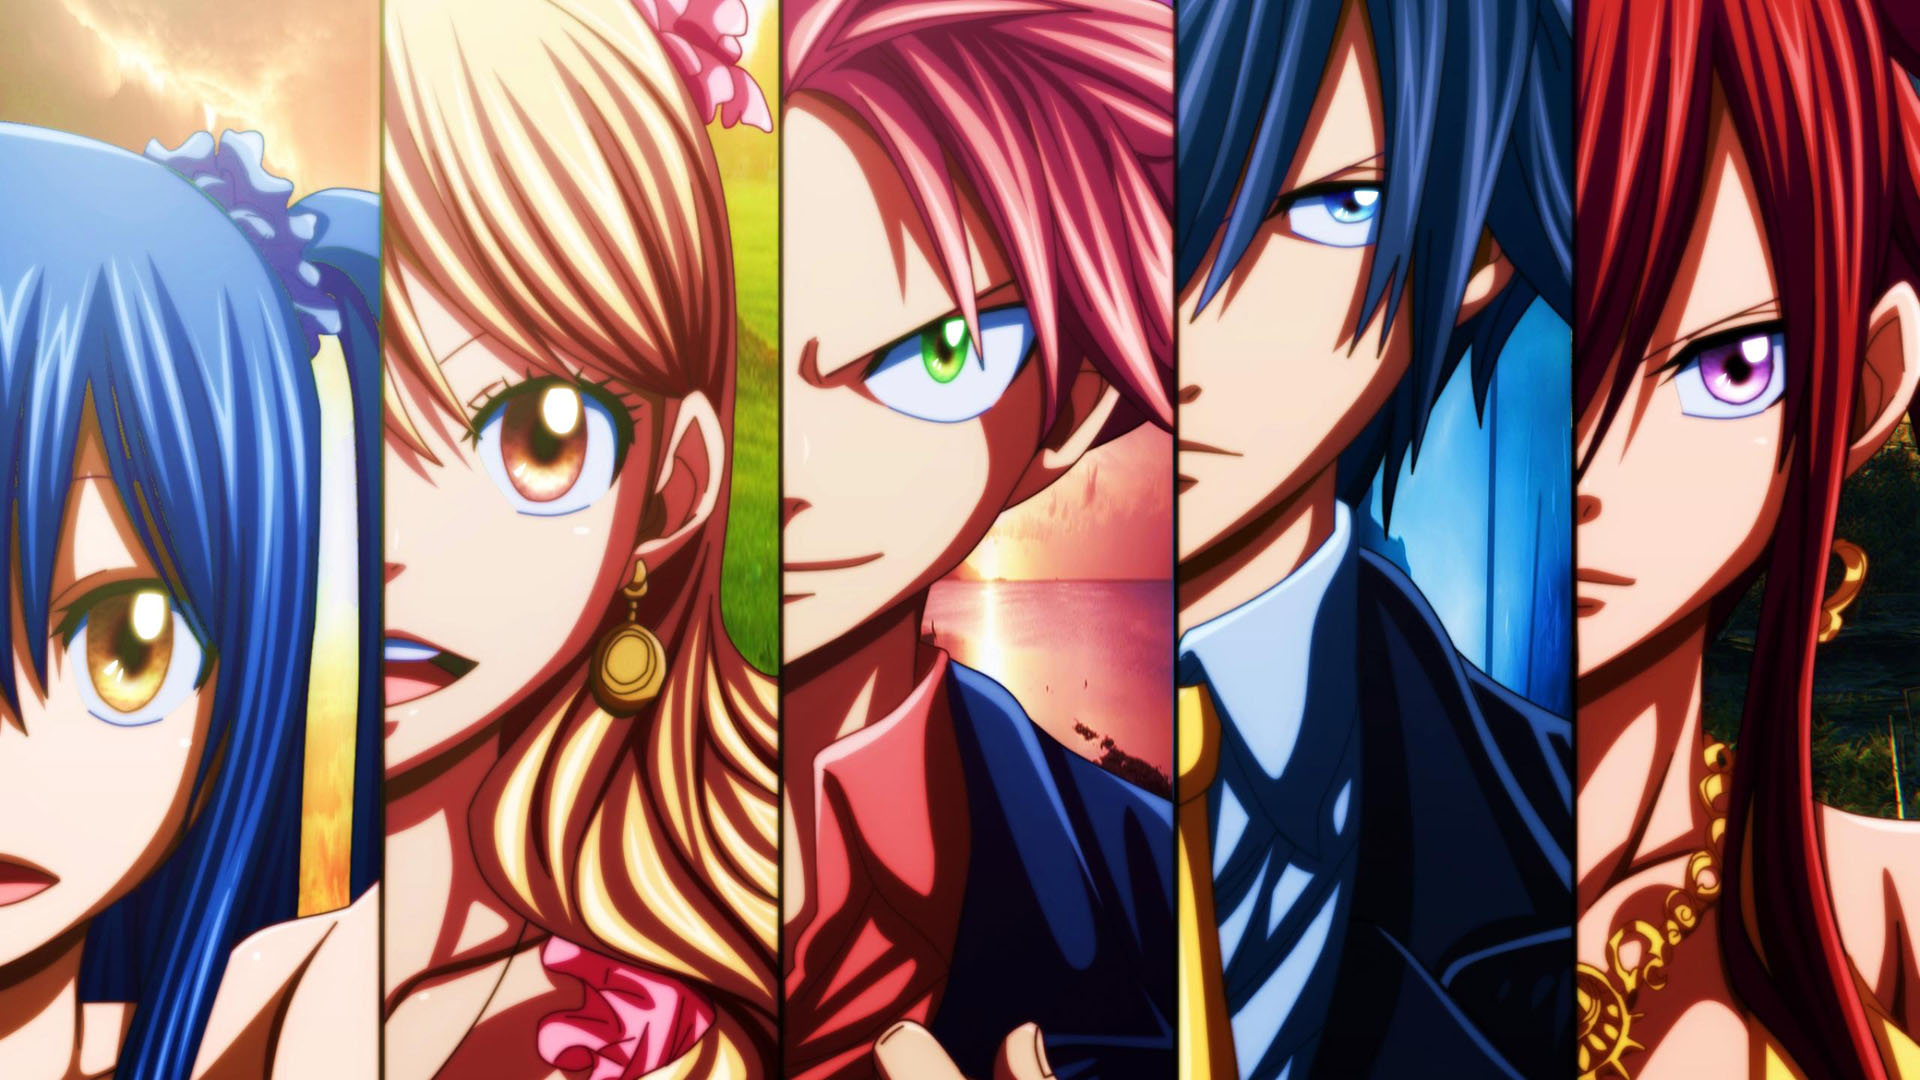 ErzaScarletXX images fairy tail wallpaper fairy tail